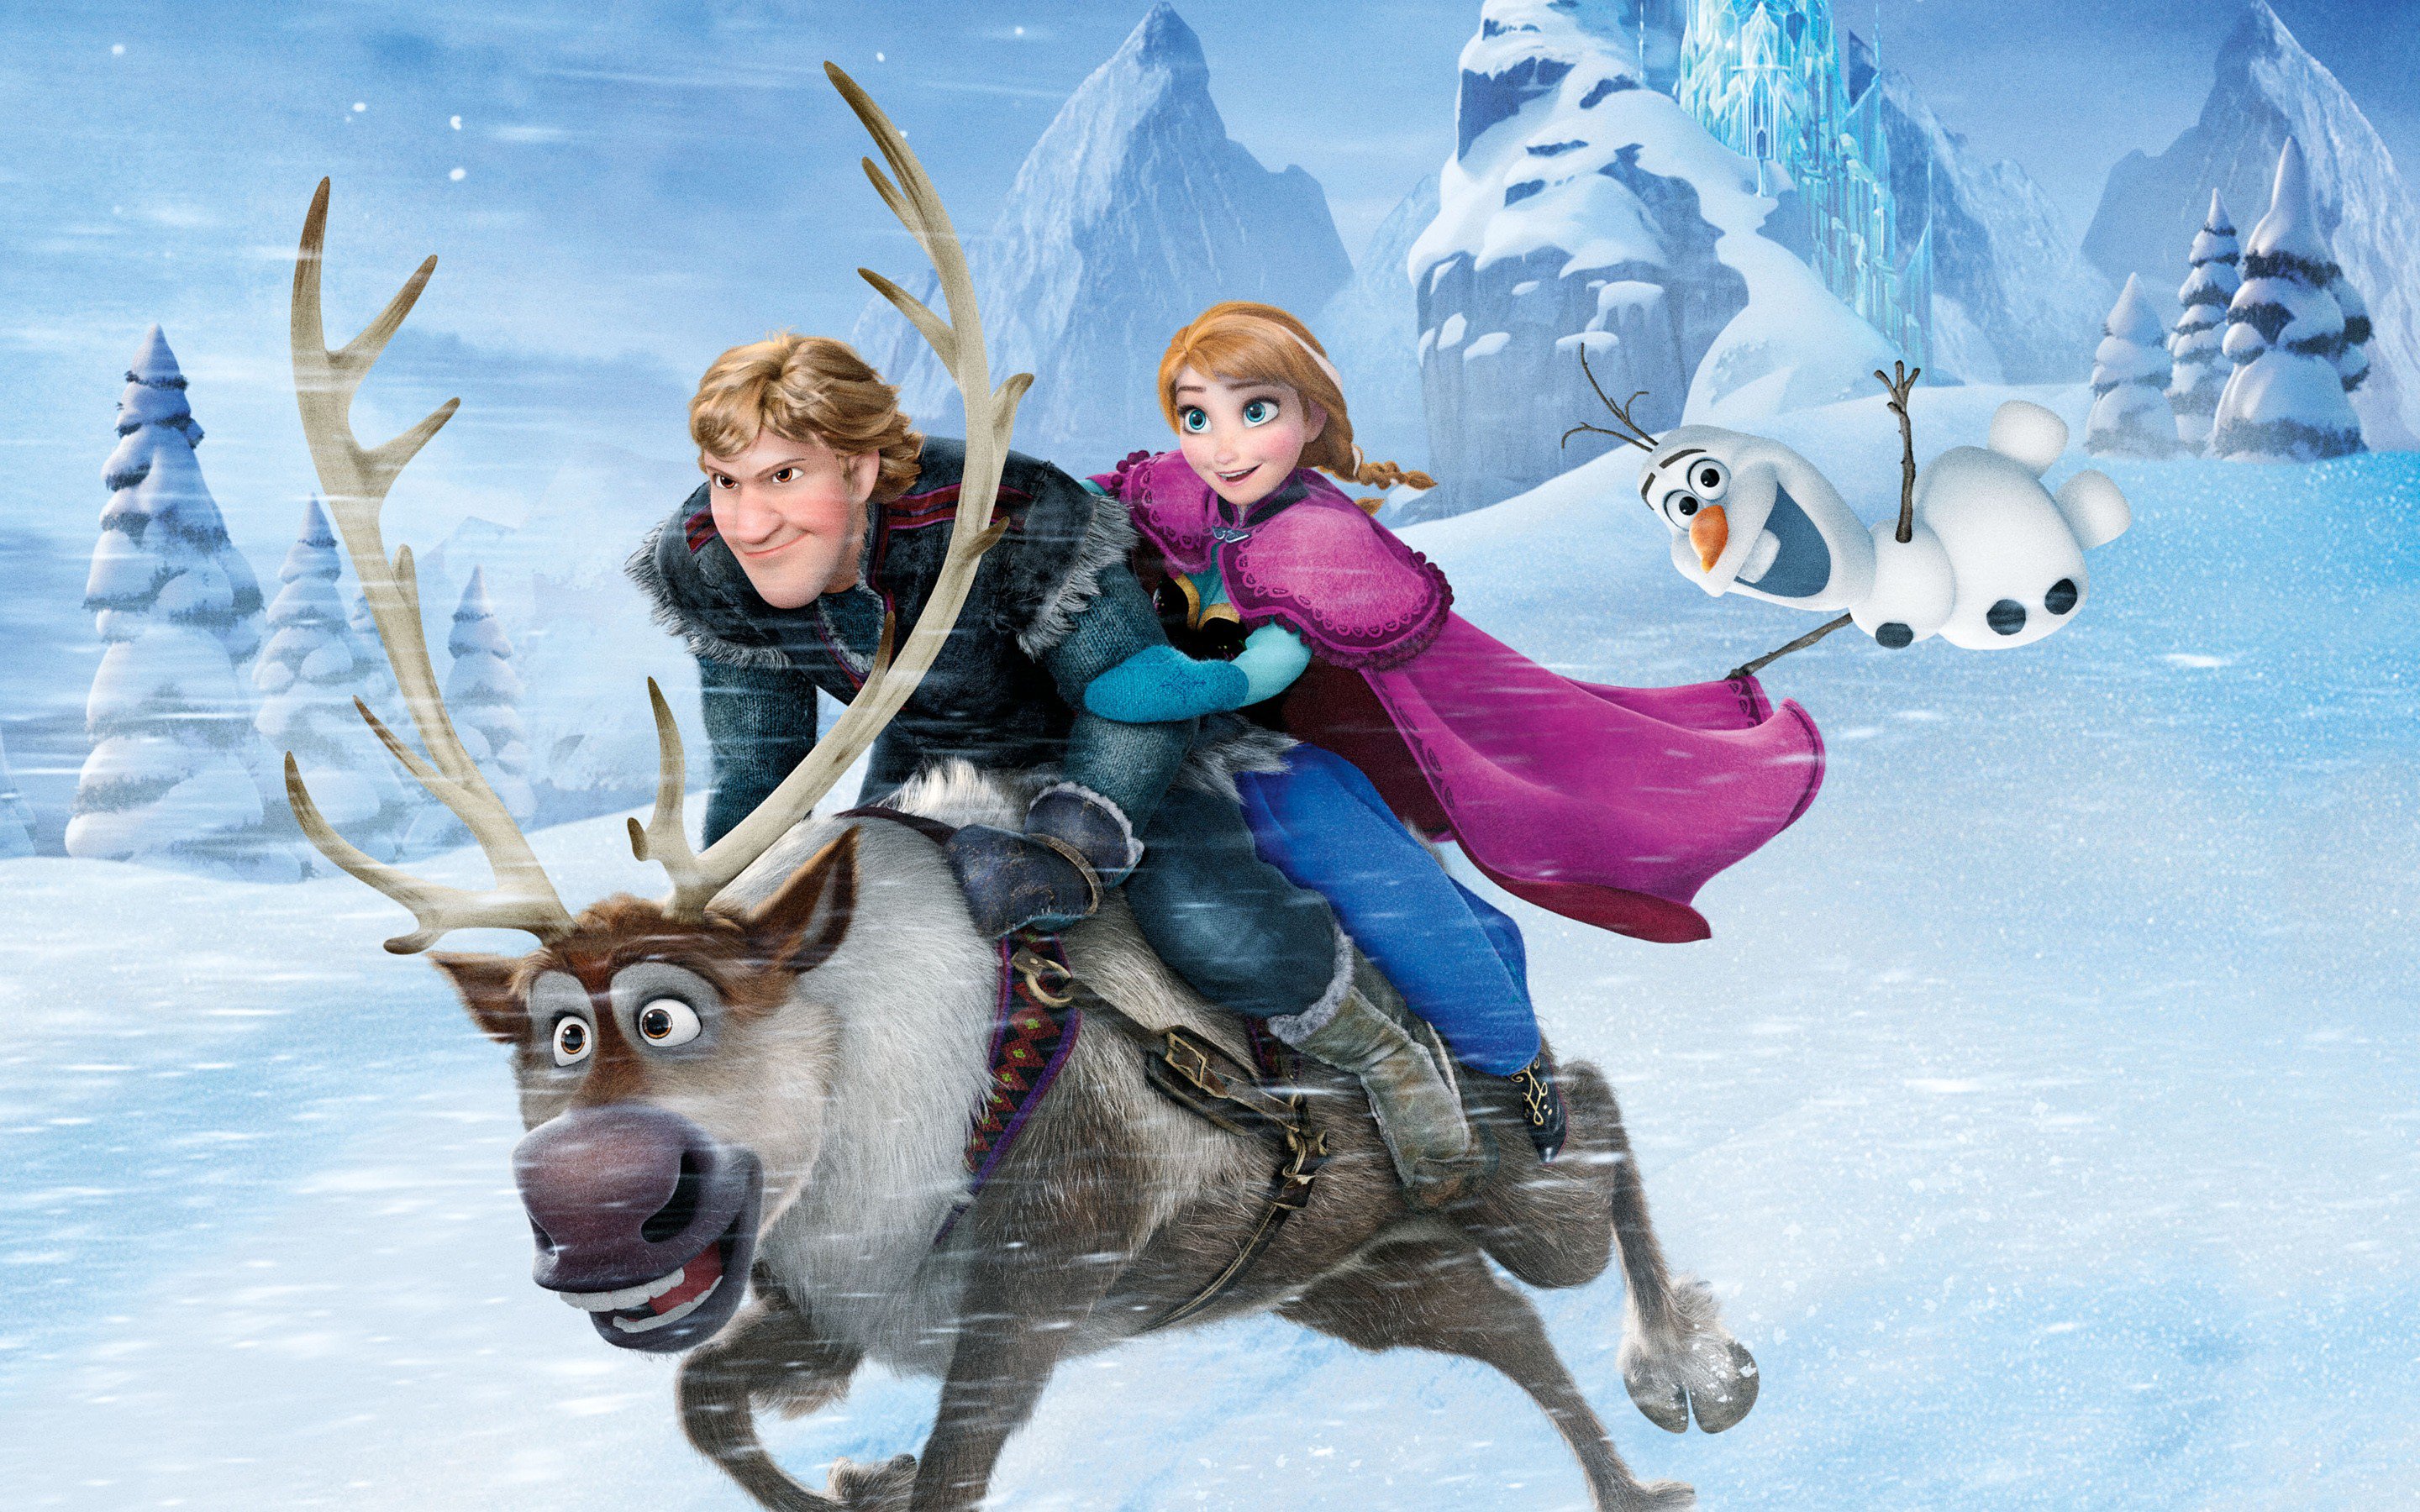 Wallpapers Frozen disney animated movies on the desktop